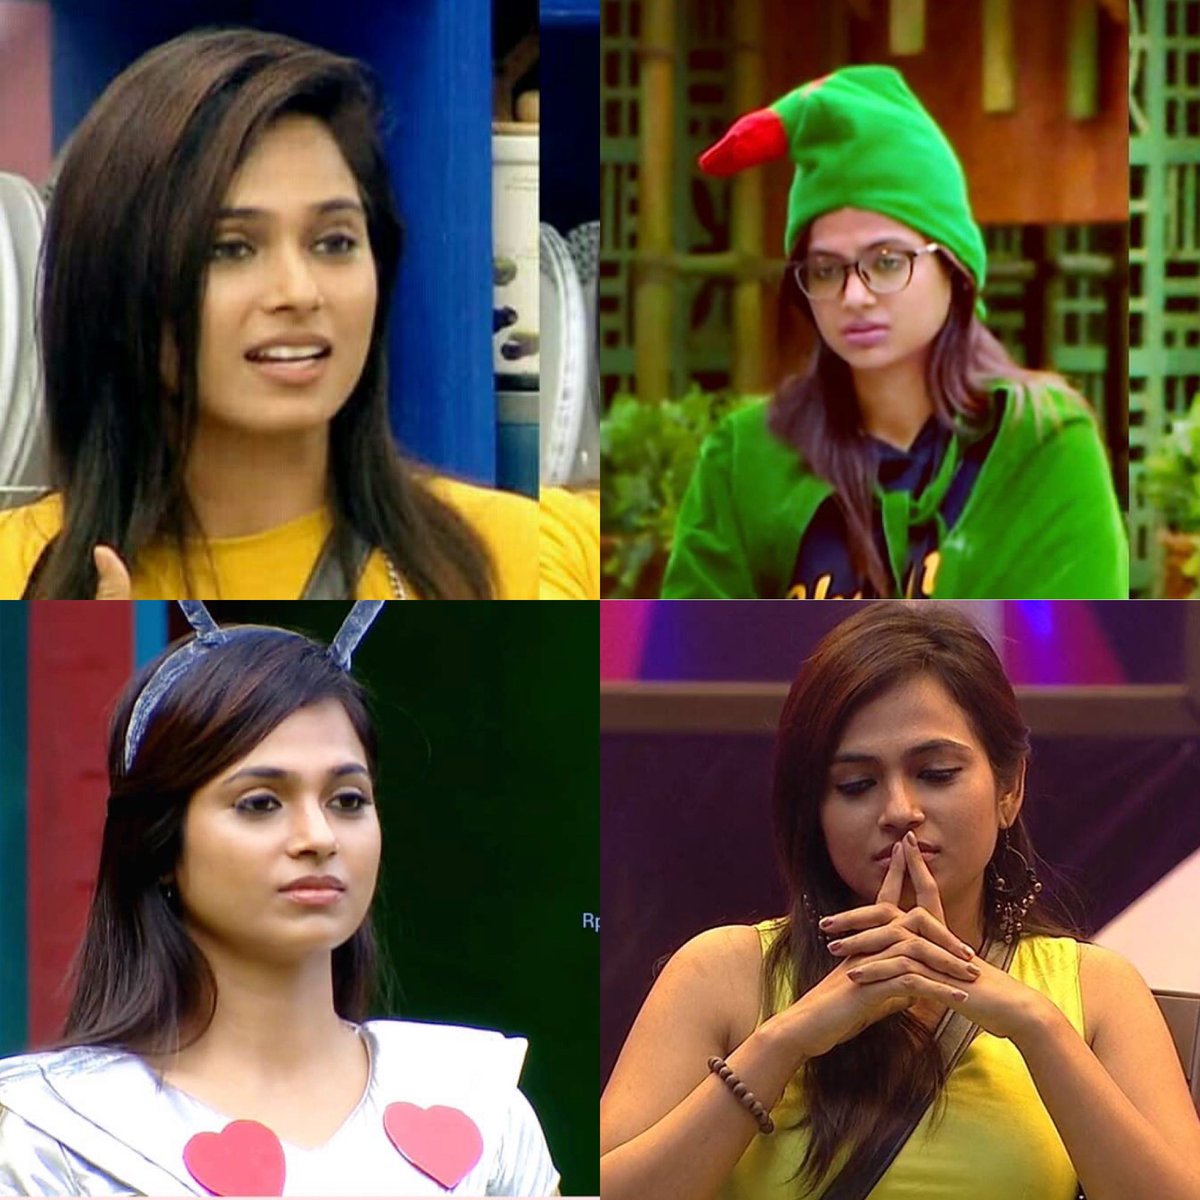 No Headweight & a dwn to earth prsn. Frm day1 all HMs unanimously voted her 1 pstn. Been cnstly calling her as title winner. She hs also been a consistent prfmr, No WP, Jail, bck 2 bck BPs but nvr let it get to hr head. It ws indeed special wen HMs awarded the KURAL sprtng this.